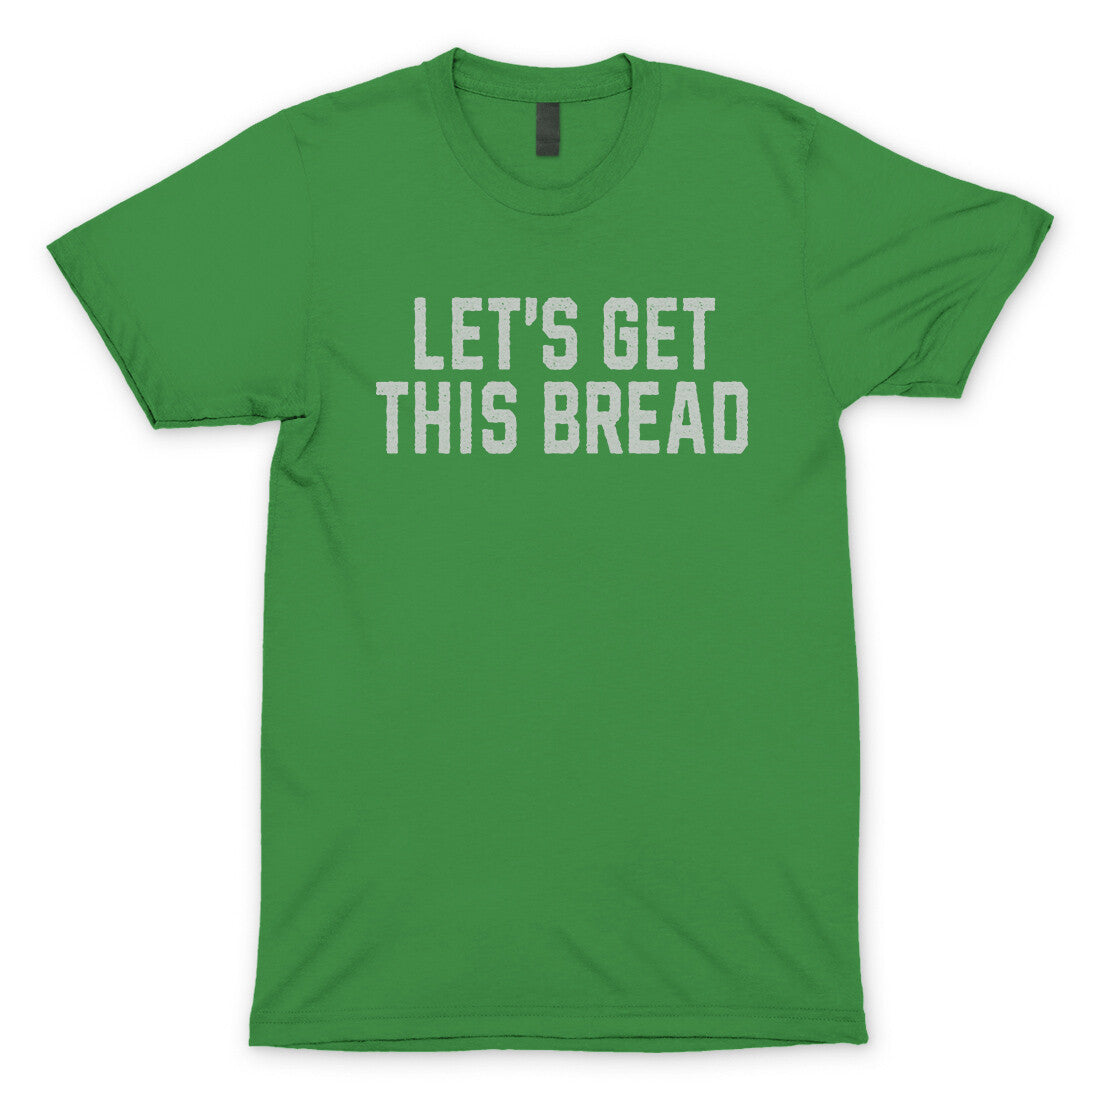 Let's Get This Bread in Irish Green Color